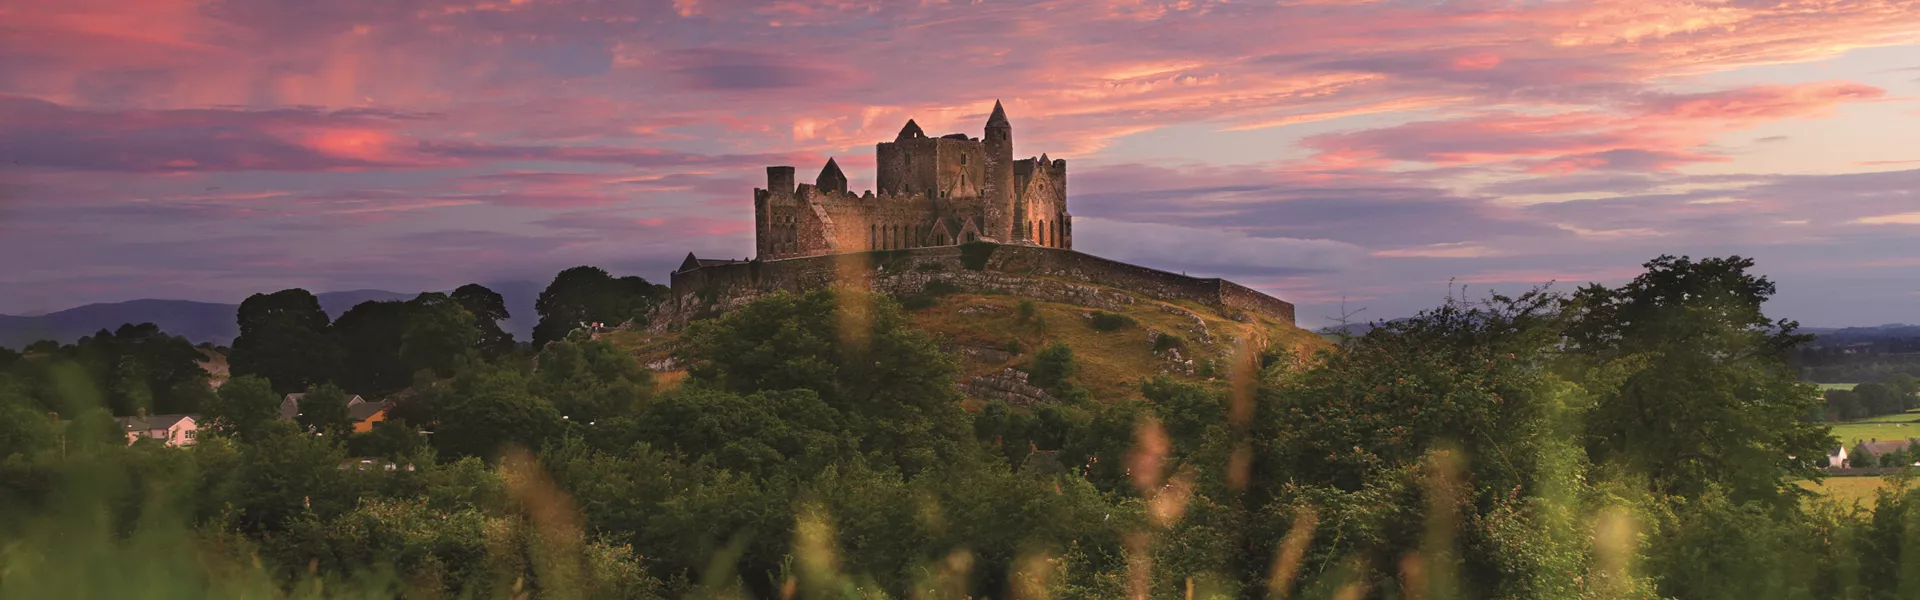 Custom Luxury Vacations in Ireland - The Rock of Cashel in Tipperary 